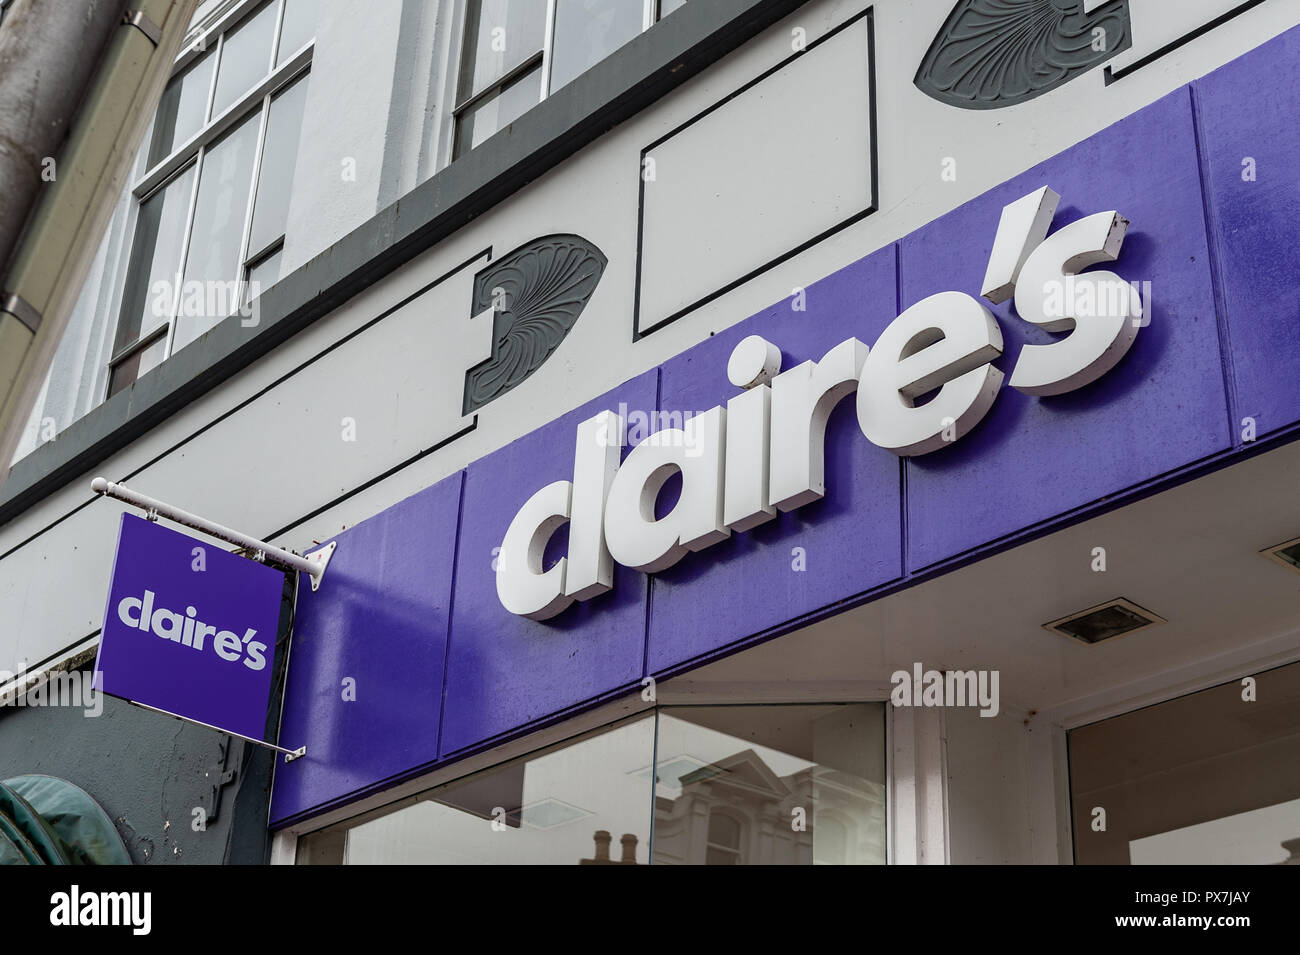 Claire's Accessories Store front in Patrick Street, Cork, Ireland. Stock Photo